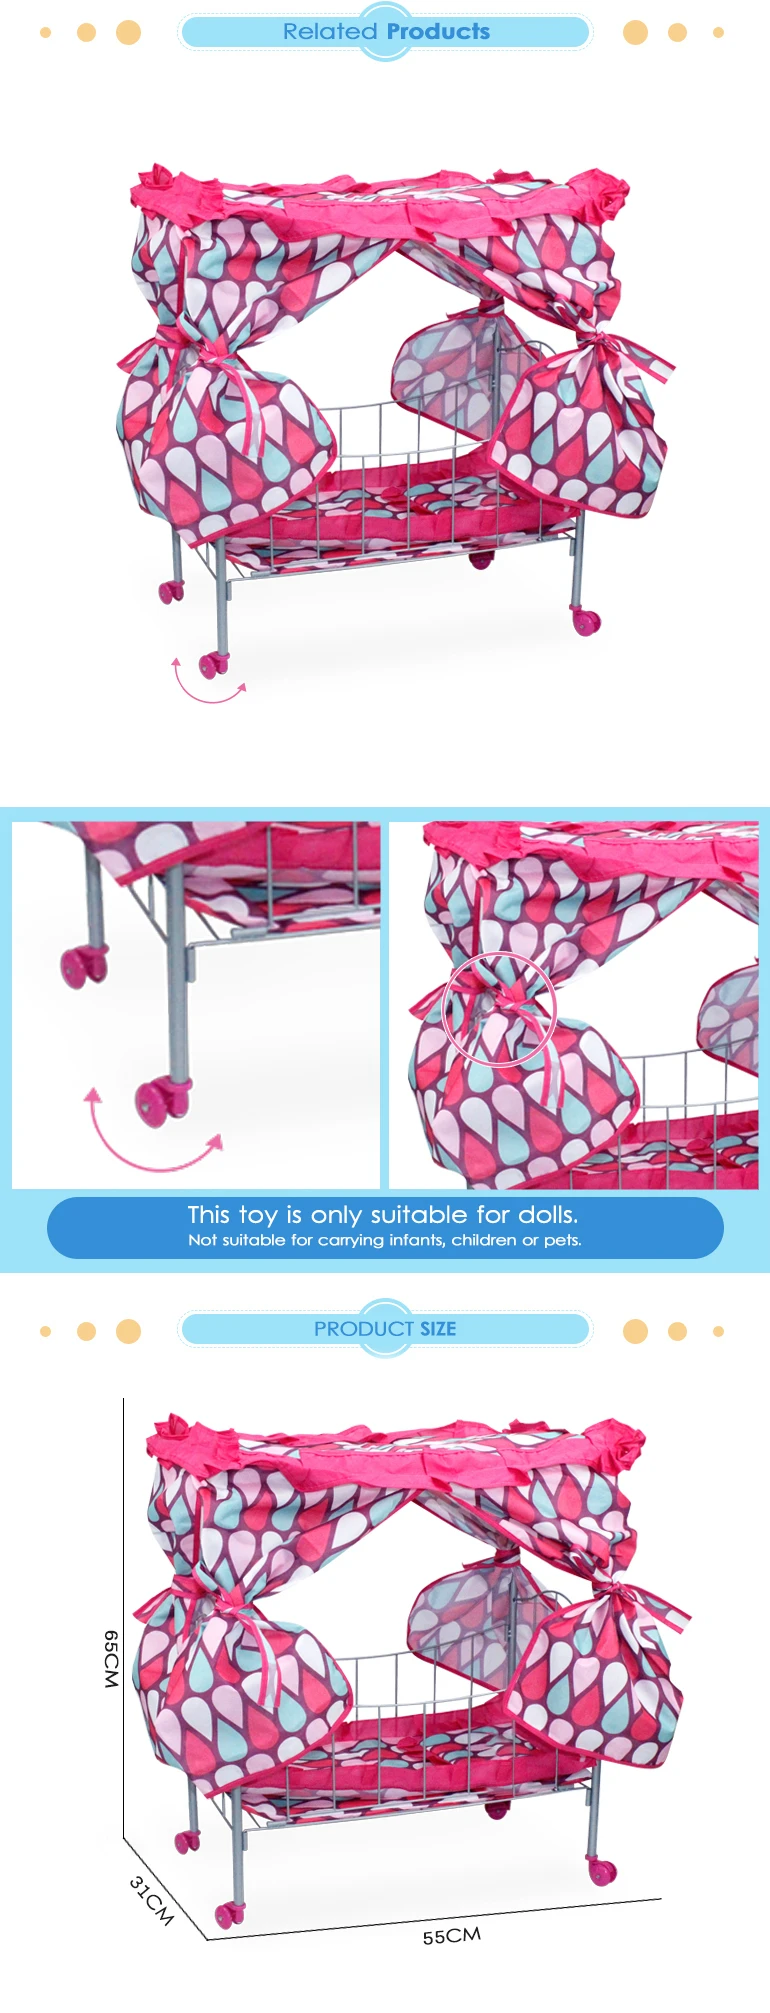 Fei li toys 2021 new fabric baby doll cradle for doll 12-18 inches Furniture Toys Set doll furniture